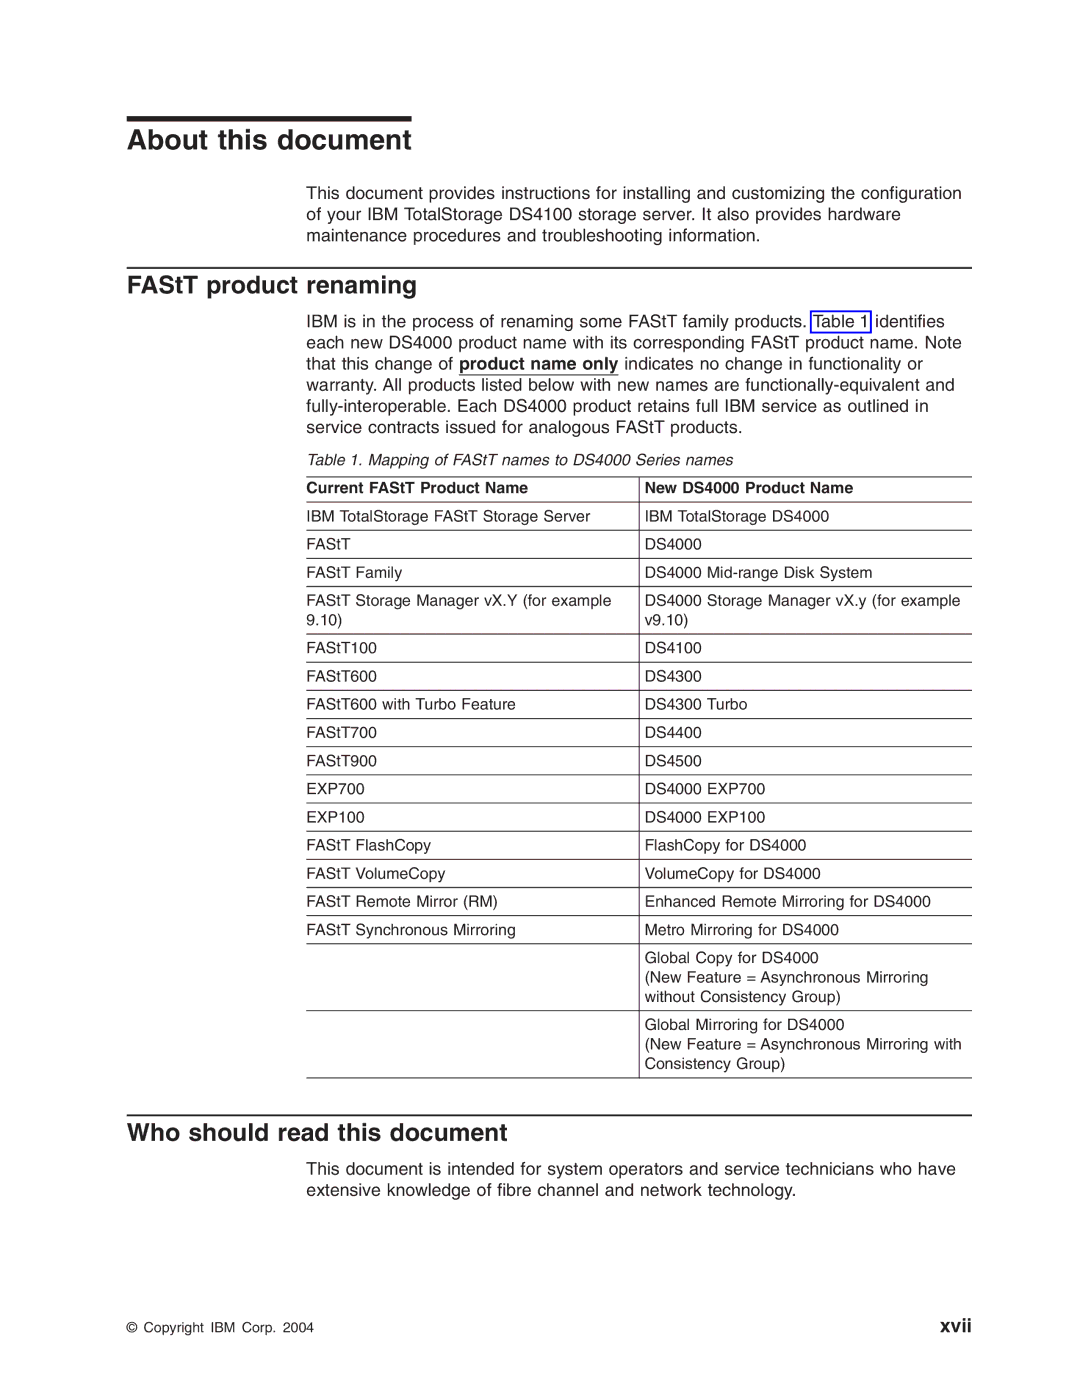 IBM Partner Pavilion DS4100 manual About this document, FAStT product renaming, Who should read this document, Xvii 